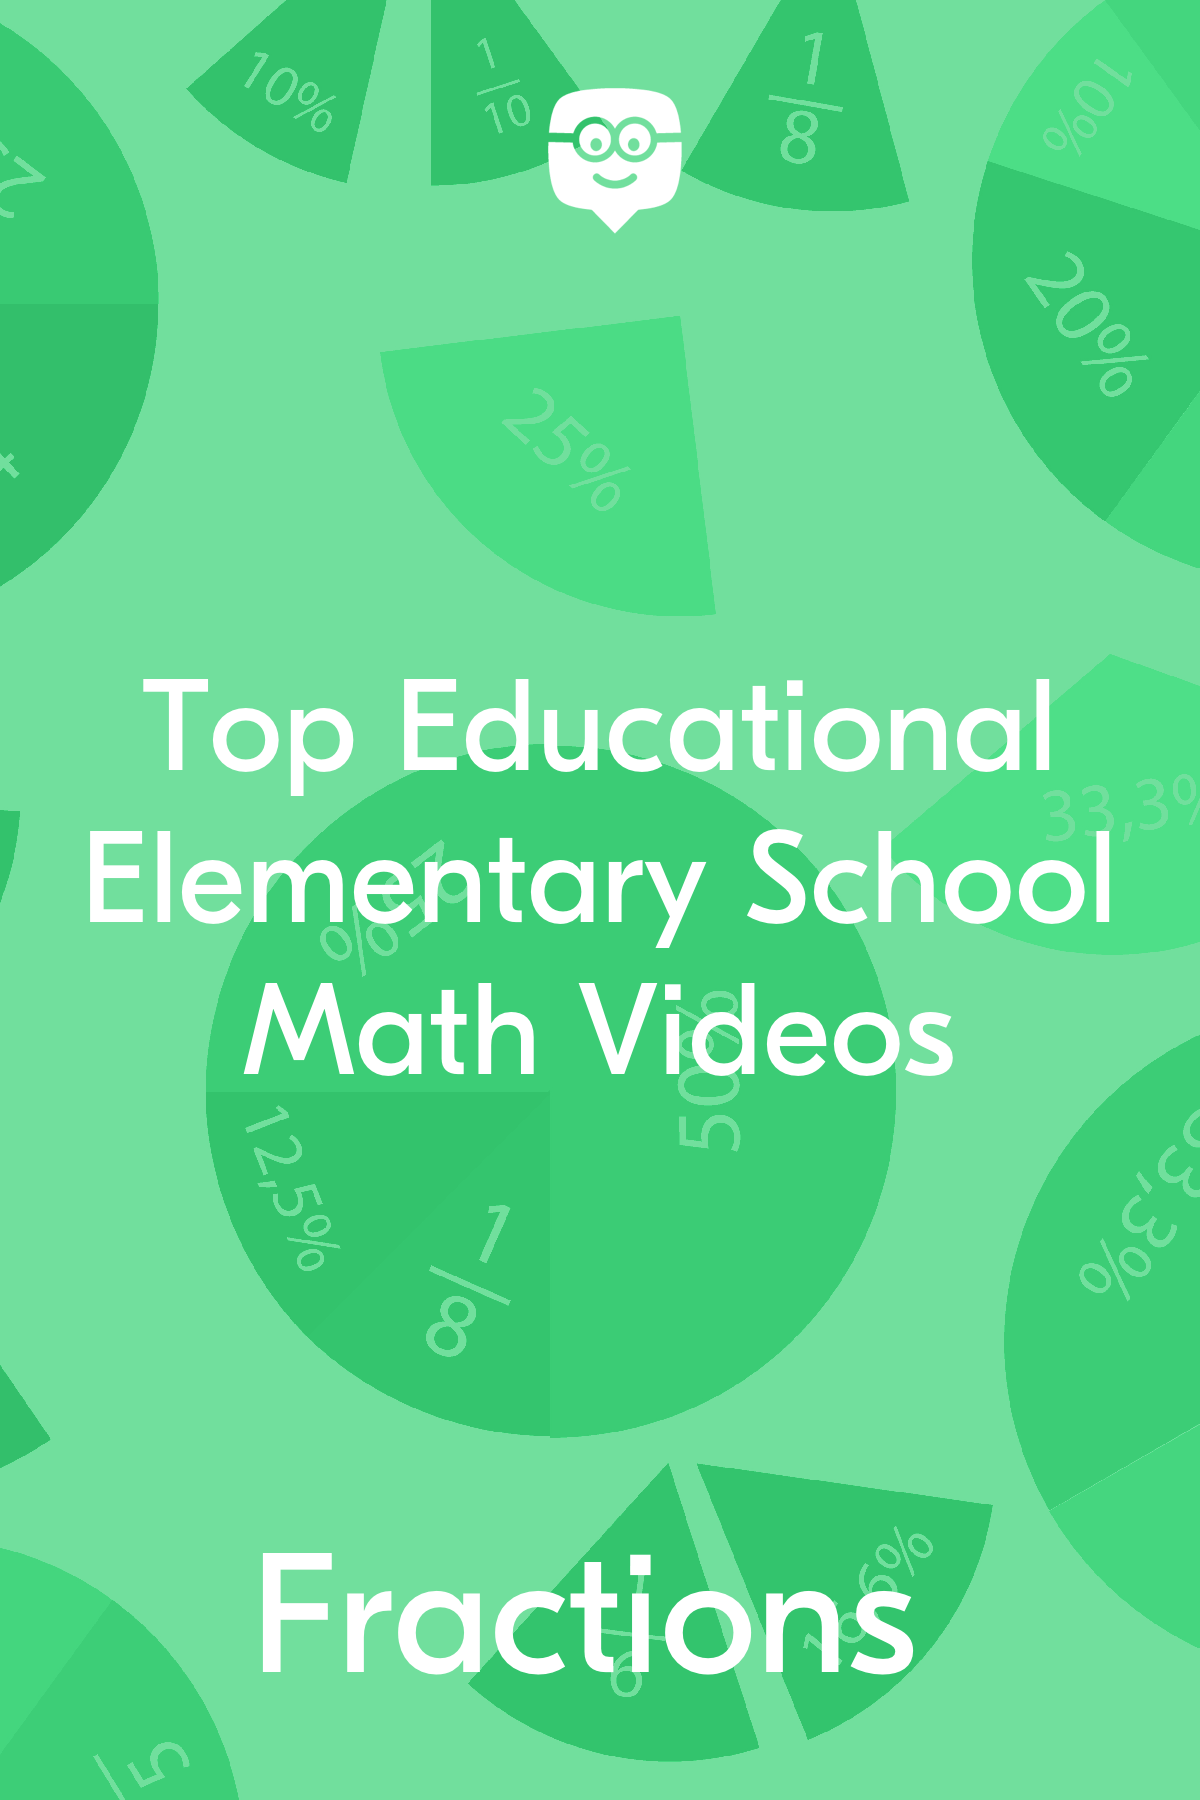 Ask Elementary Logo - Explore School Safe Educational Videos About Fractions Using AskMo